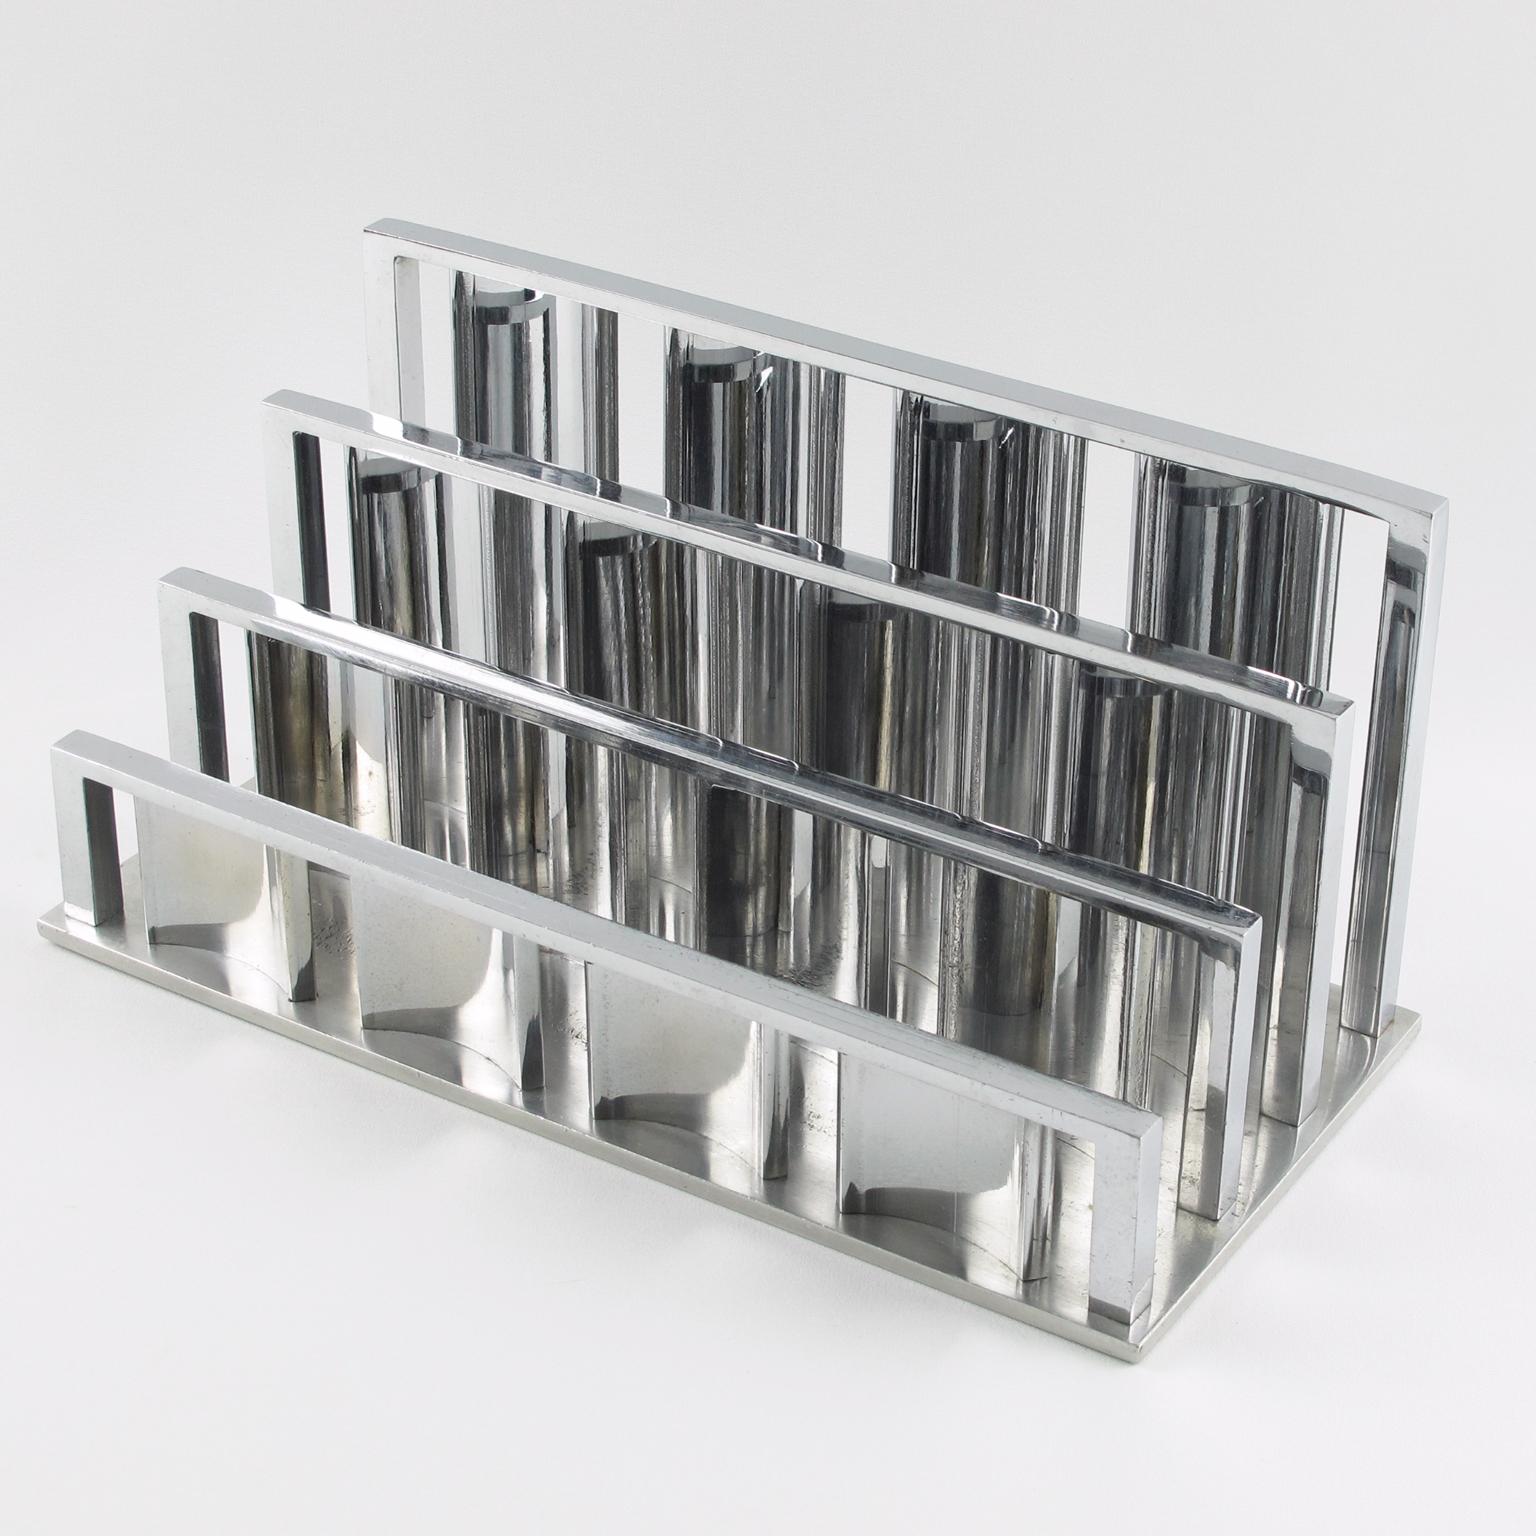 Stunning Art Deco modernist chromed metal desk accessory, letter holder designed by French Jacques Adnet (1901 - 1984). Elegant Minimalist geometric shape mail rack. 
Measurements: 11.43 in. wide (29 cm) x 5.50 in. deep (14 cm) x 5.31 in. high